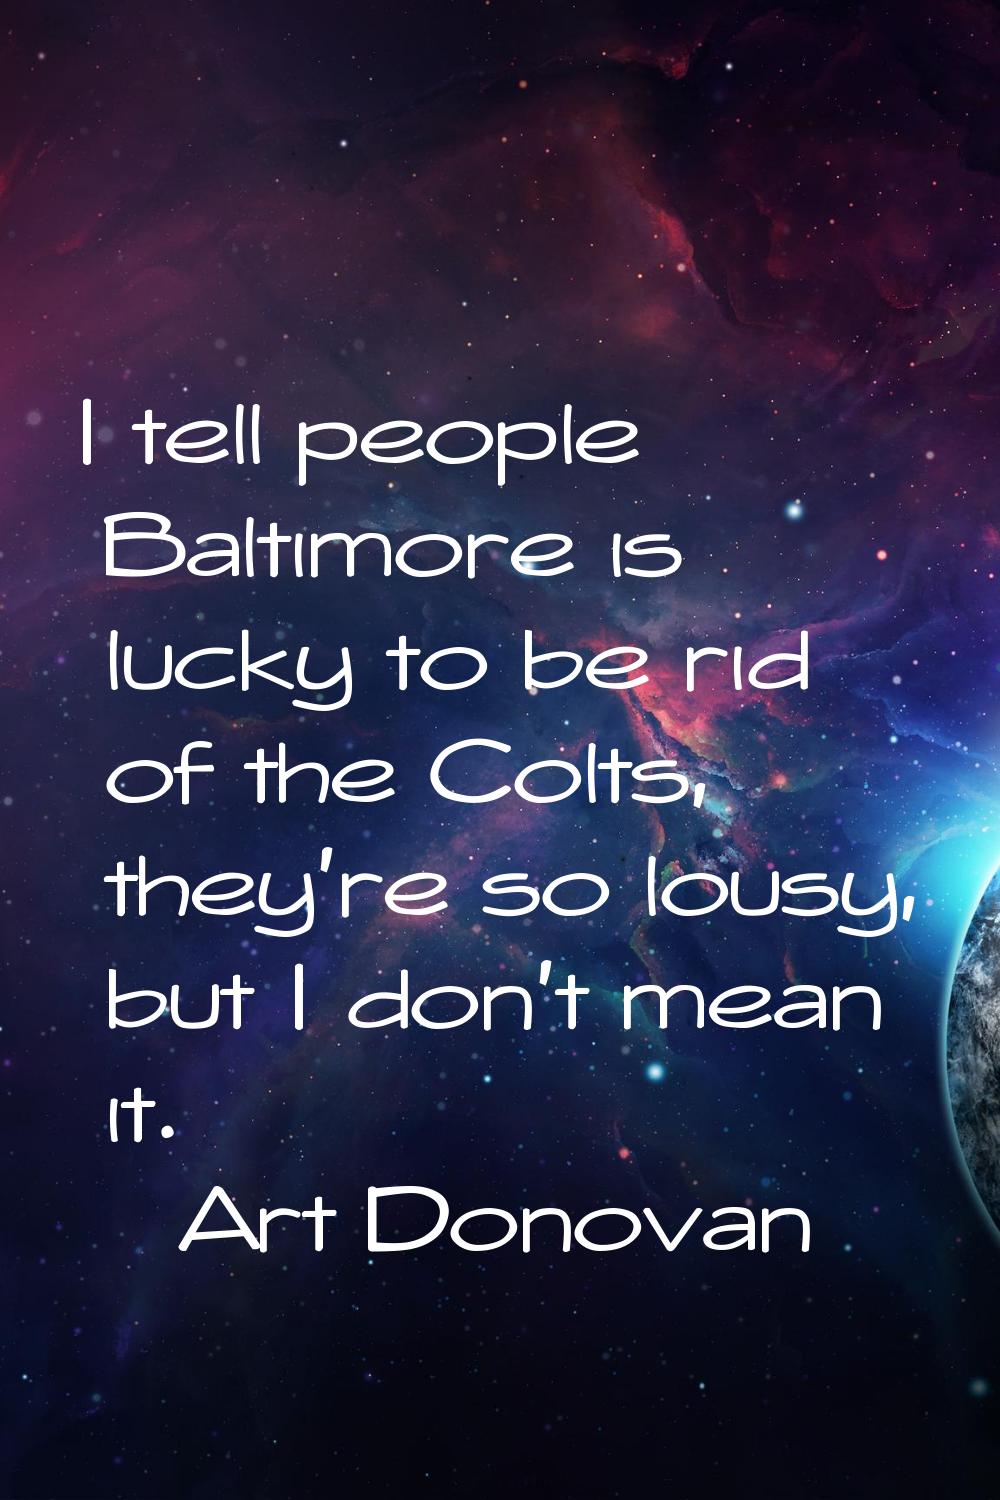 I tell people Baltimore is lucky to be rid of the Colts, they're so lousy, but I don't mean it.